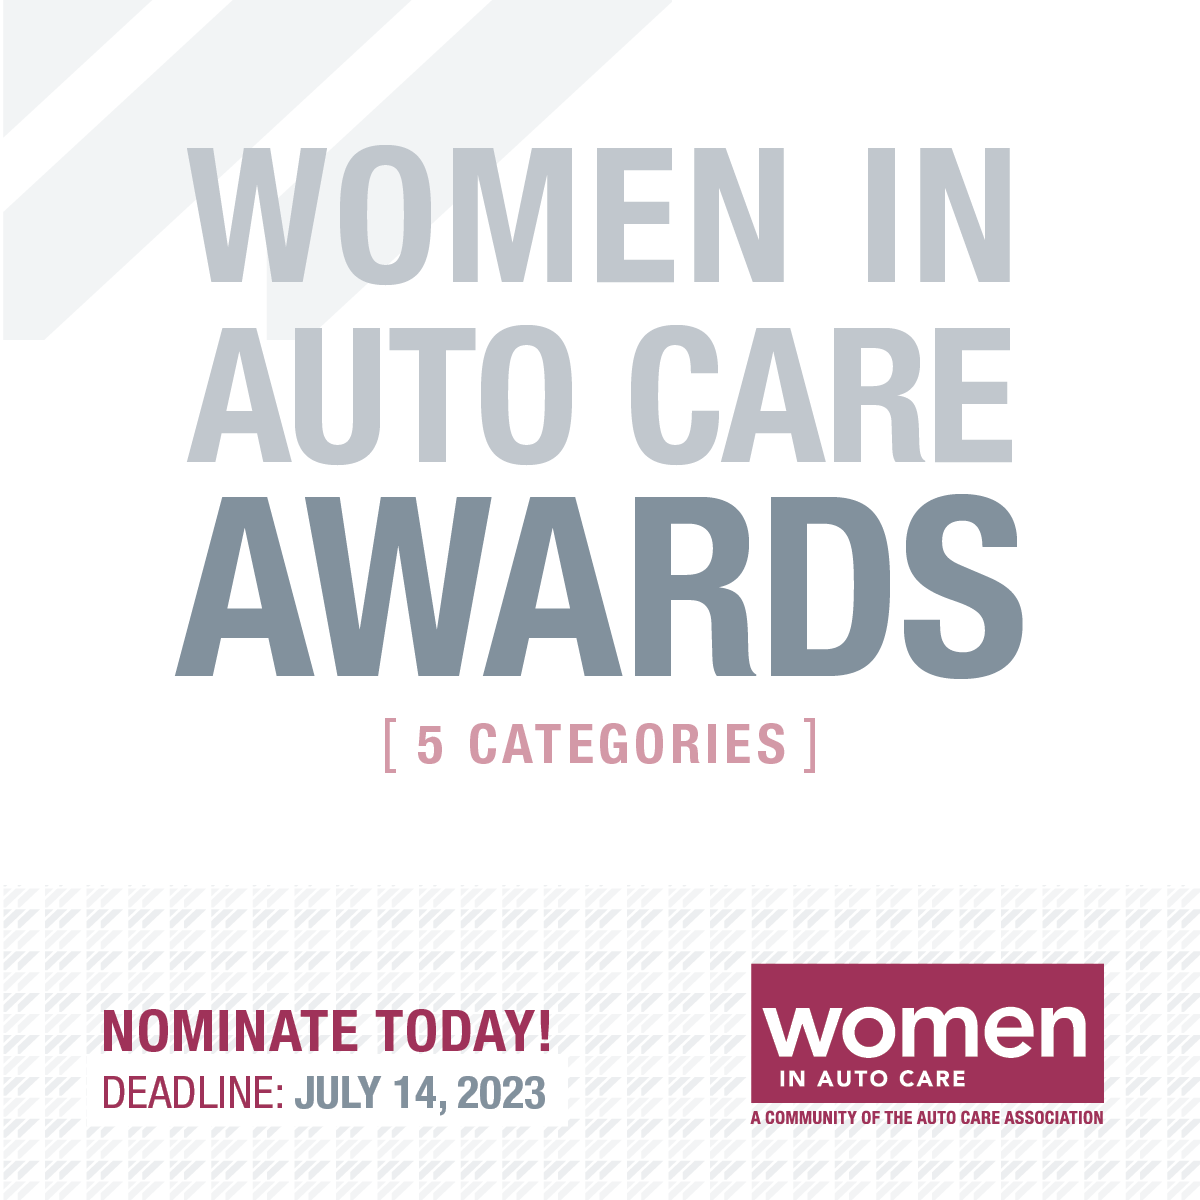 Highlighting opportunities for diversity in the trades is part of the U.S. Auto Tech National Championship mission.​

Nominate a woman in the industry that deserves this recognition. @WomenInAutoCare 2023 Awards Nomination.

alchemer.com